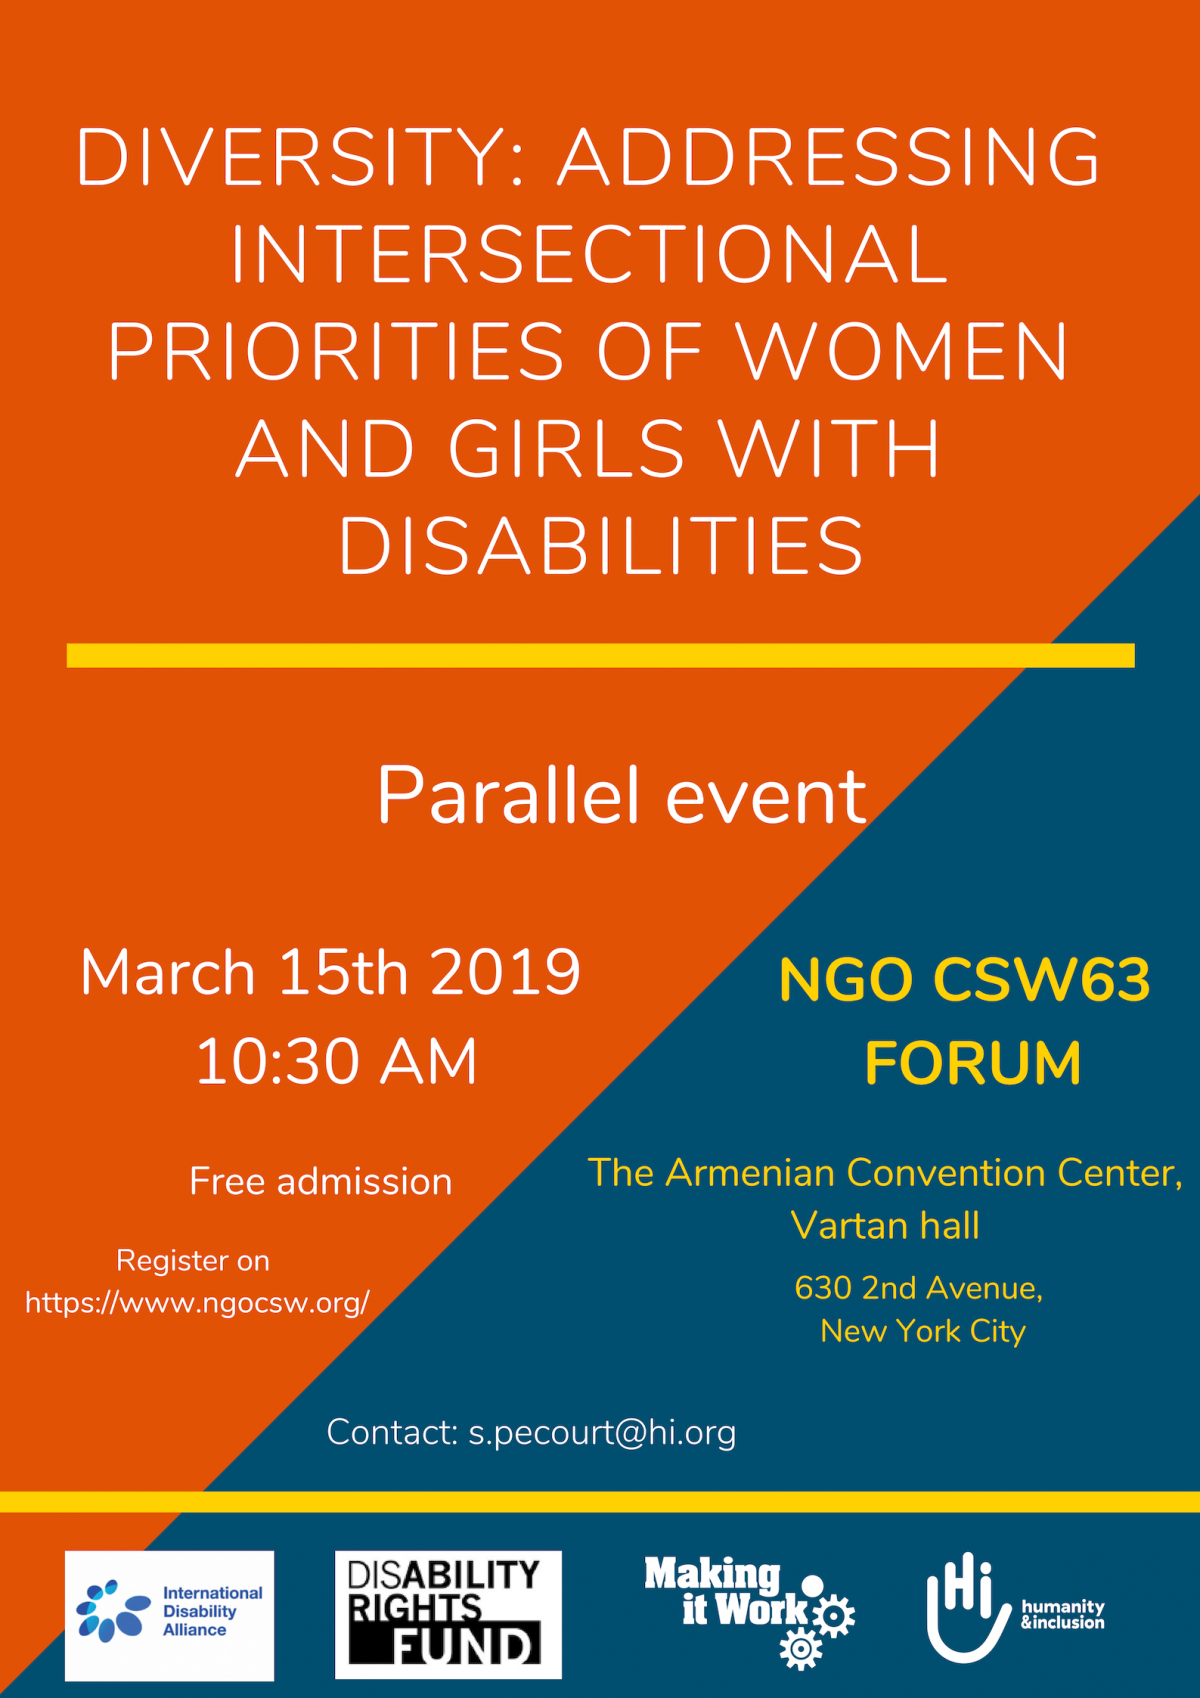 Poster for the CSW63 parallel event of IDA, DRF, Making It Work and HI. The title of the event is Diversity: addressing intersectional priorities of women and girls with disabilities. The date is March 15th 2019, 10:30 am at the Armenian Convention Center, Vartan hall, on 630 second avenue, New York city. The contact person is s.pecourt@hi.org. The text is on an orange and blue poster with yellow highlights.